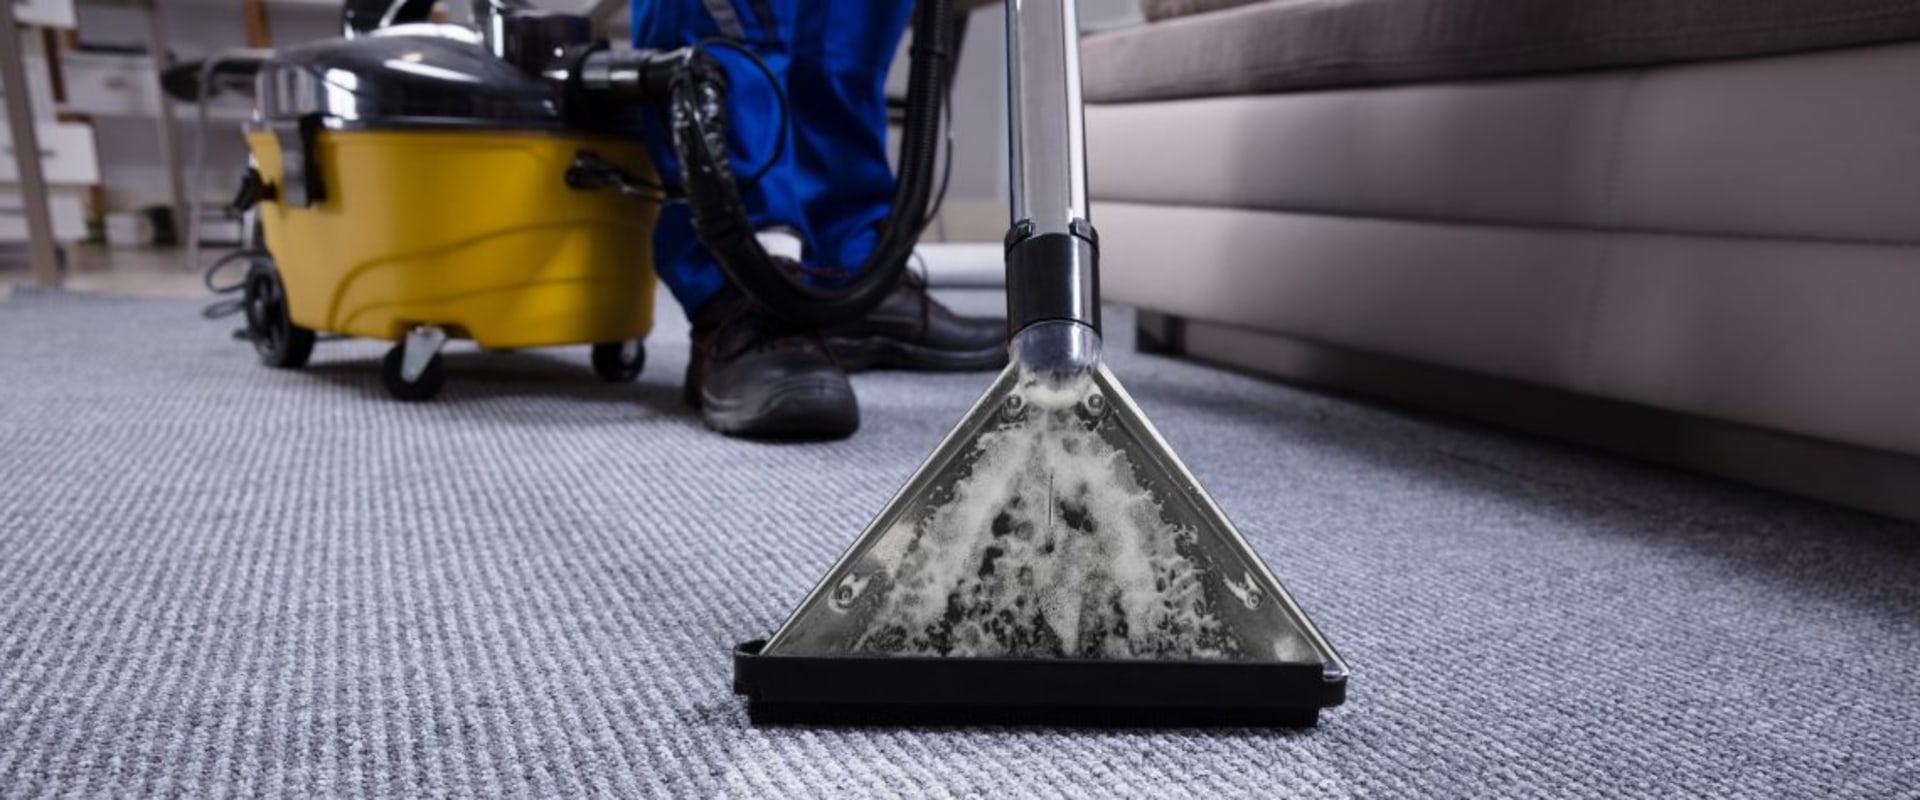 What is the easiest and fastest way to clean carpet?